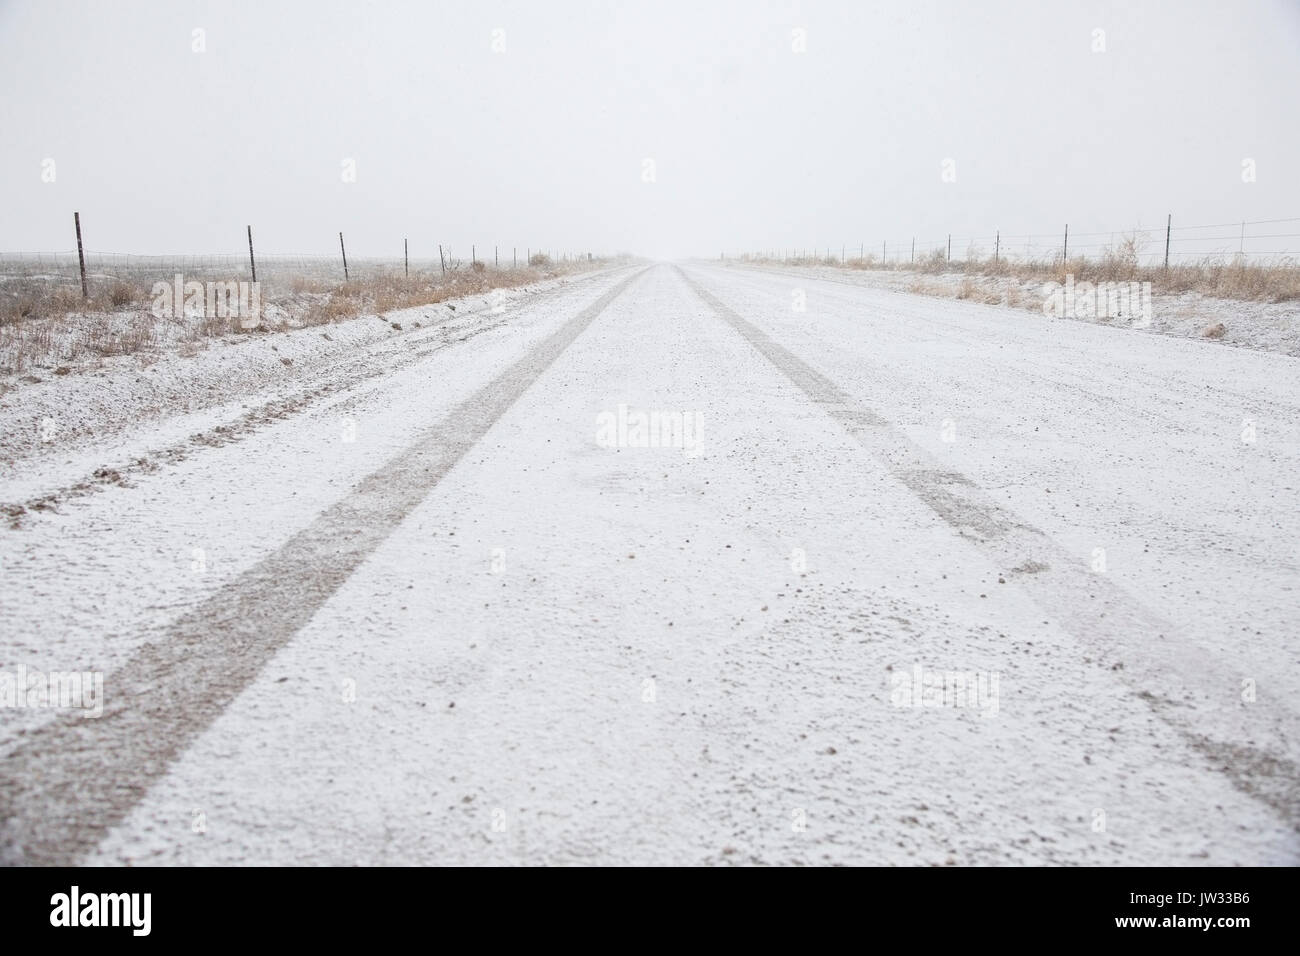 USA, Colorado, Empty dirt road covered with snow Stock Photo